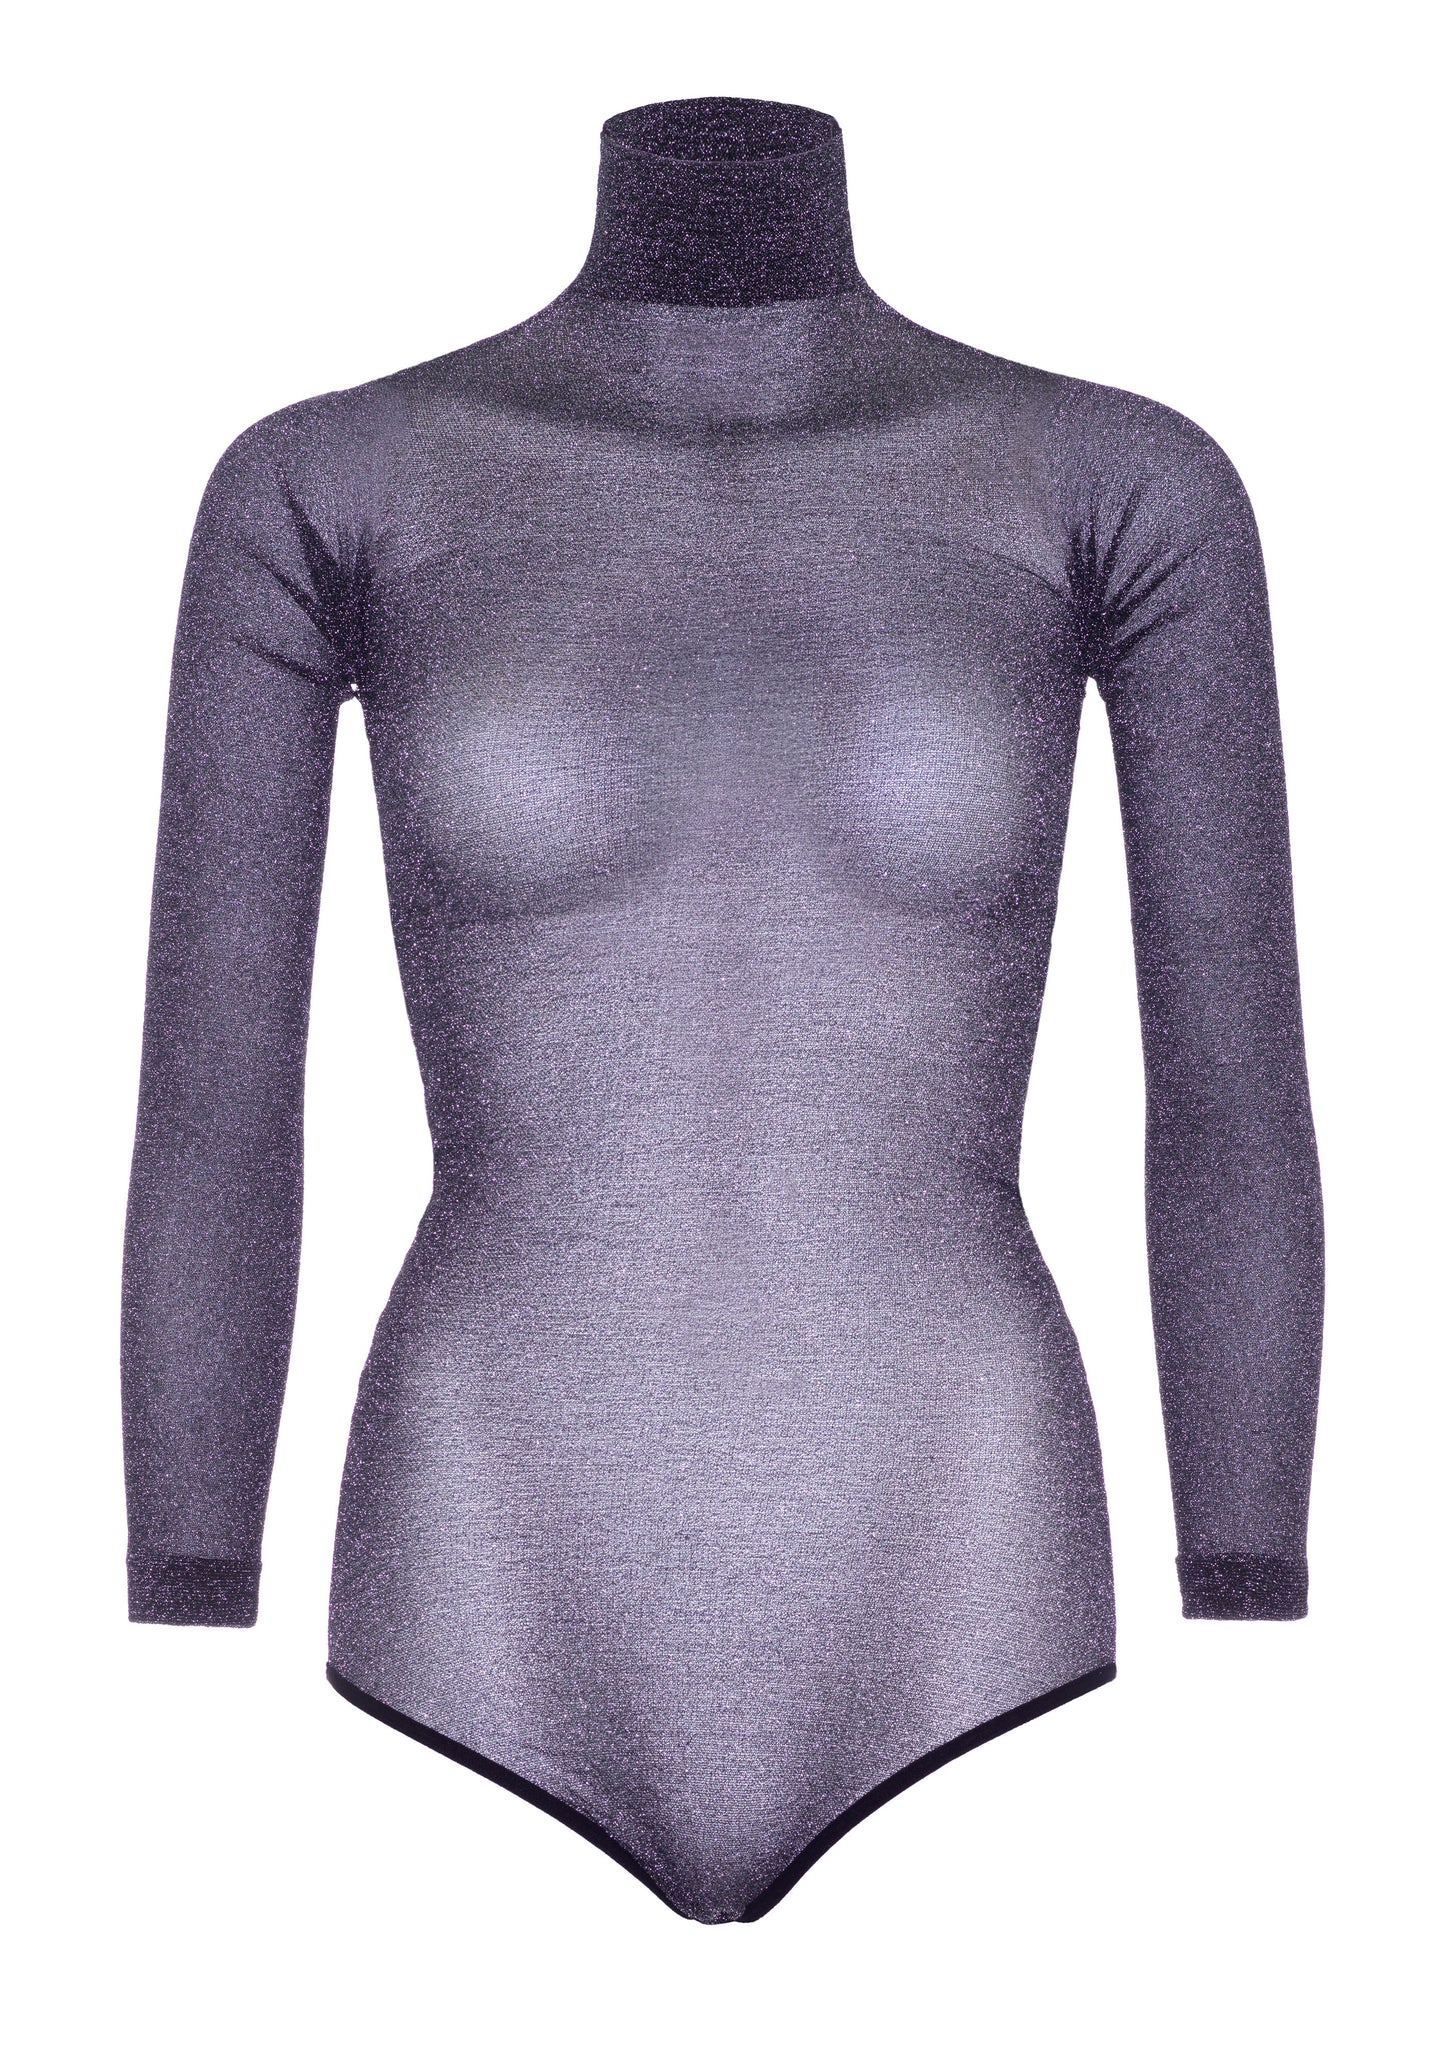 Leg Avenue 89242 Lurex Bodysuit - Black semi-opaque turtle neck long sleeved body-top with silver sparkly lame' throughout and snap fastener closures, perfect for the party season. Please note that this item is transparent and made from a nylon tights material.